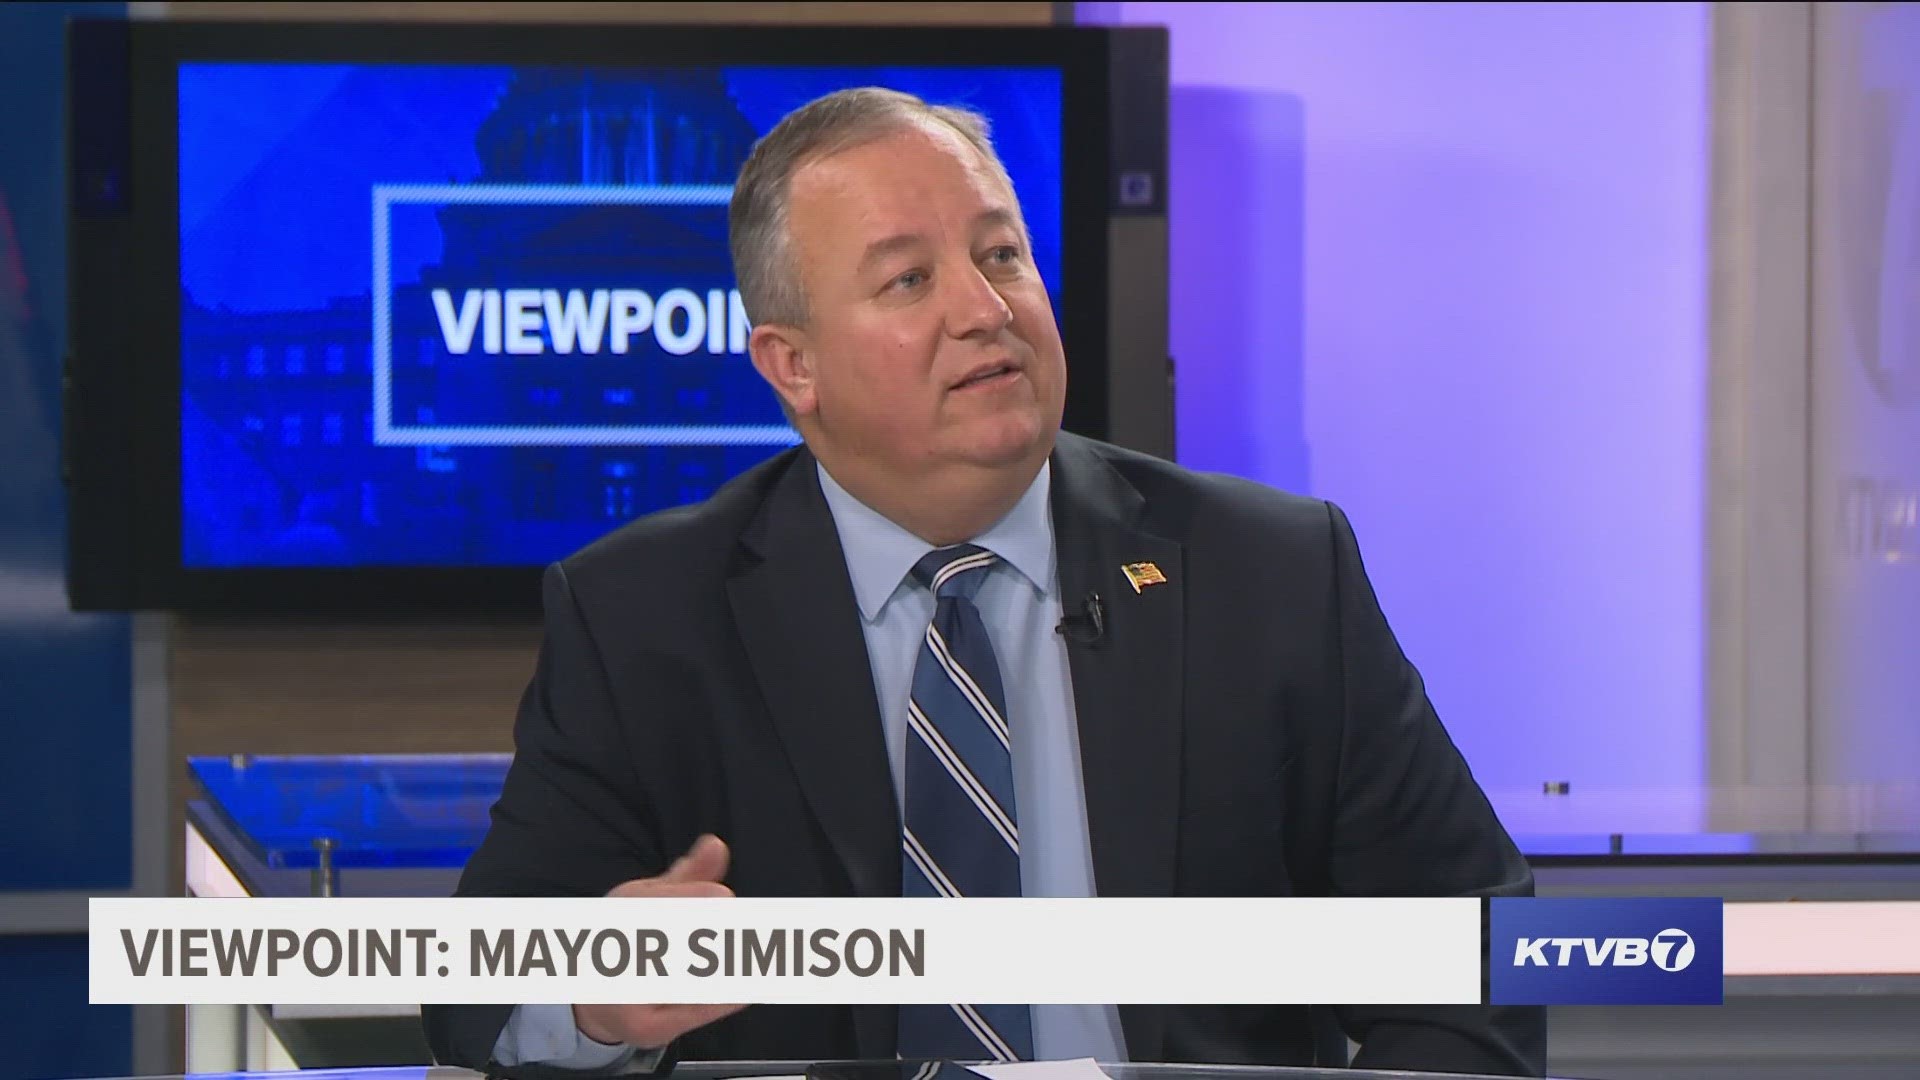 Catch Viewpoint Sunday morning on KTVB at 9 a.m. This Sunday, guest Mayor Simison joins the show.